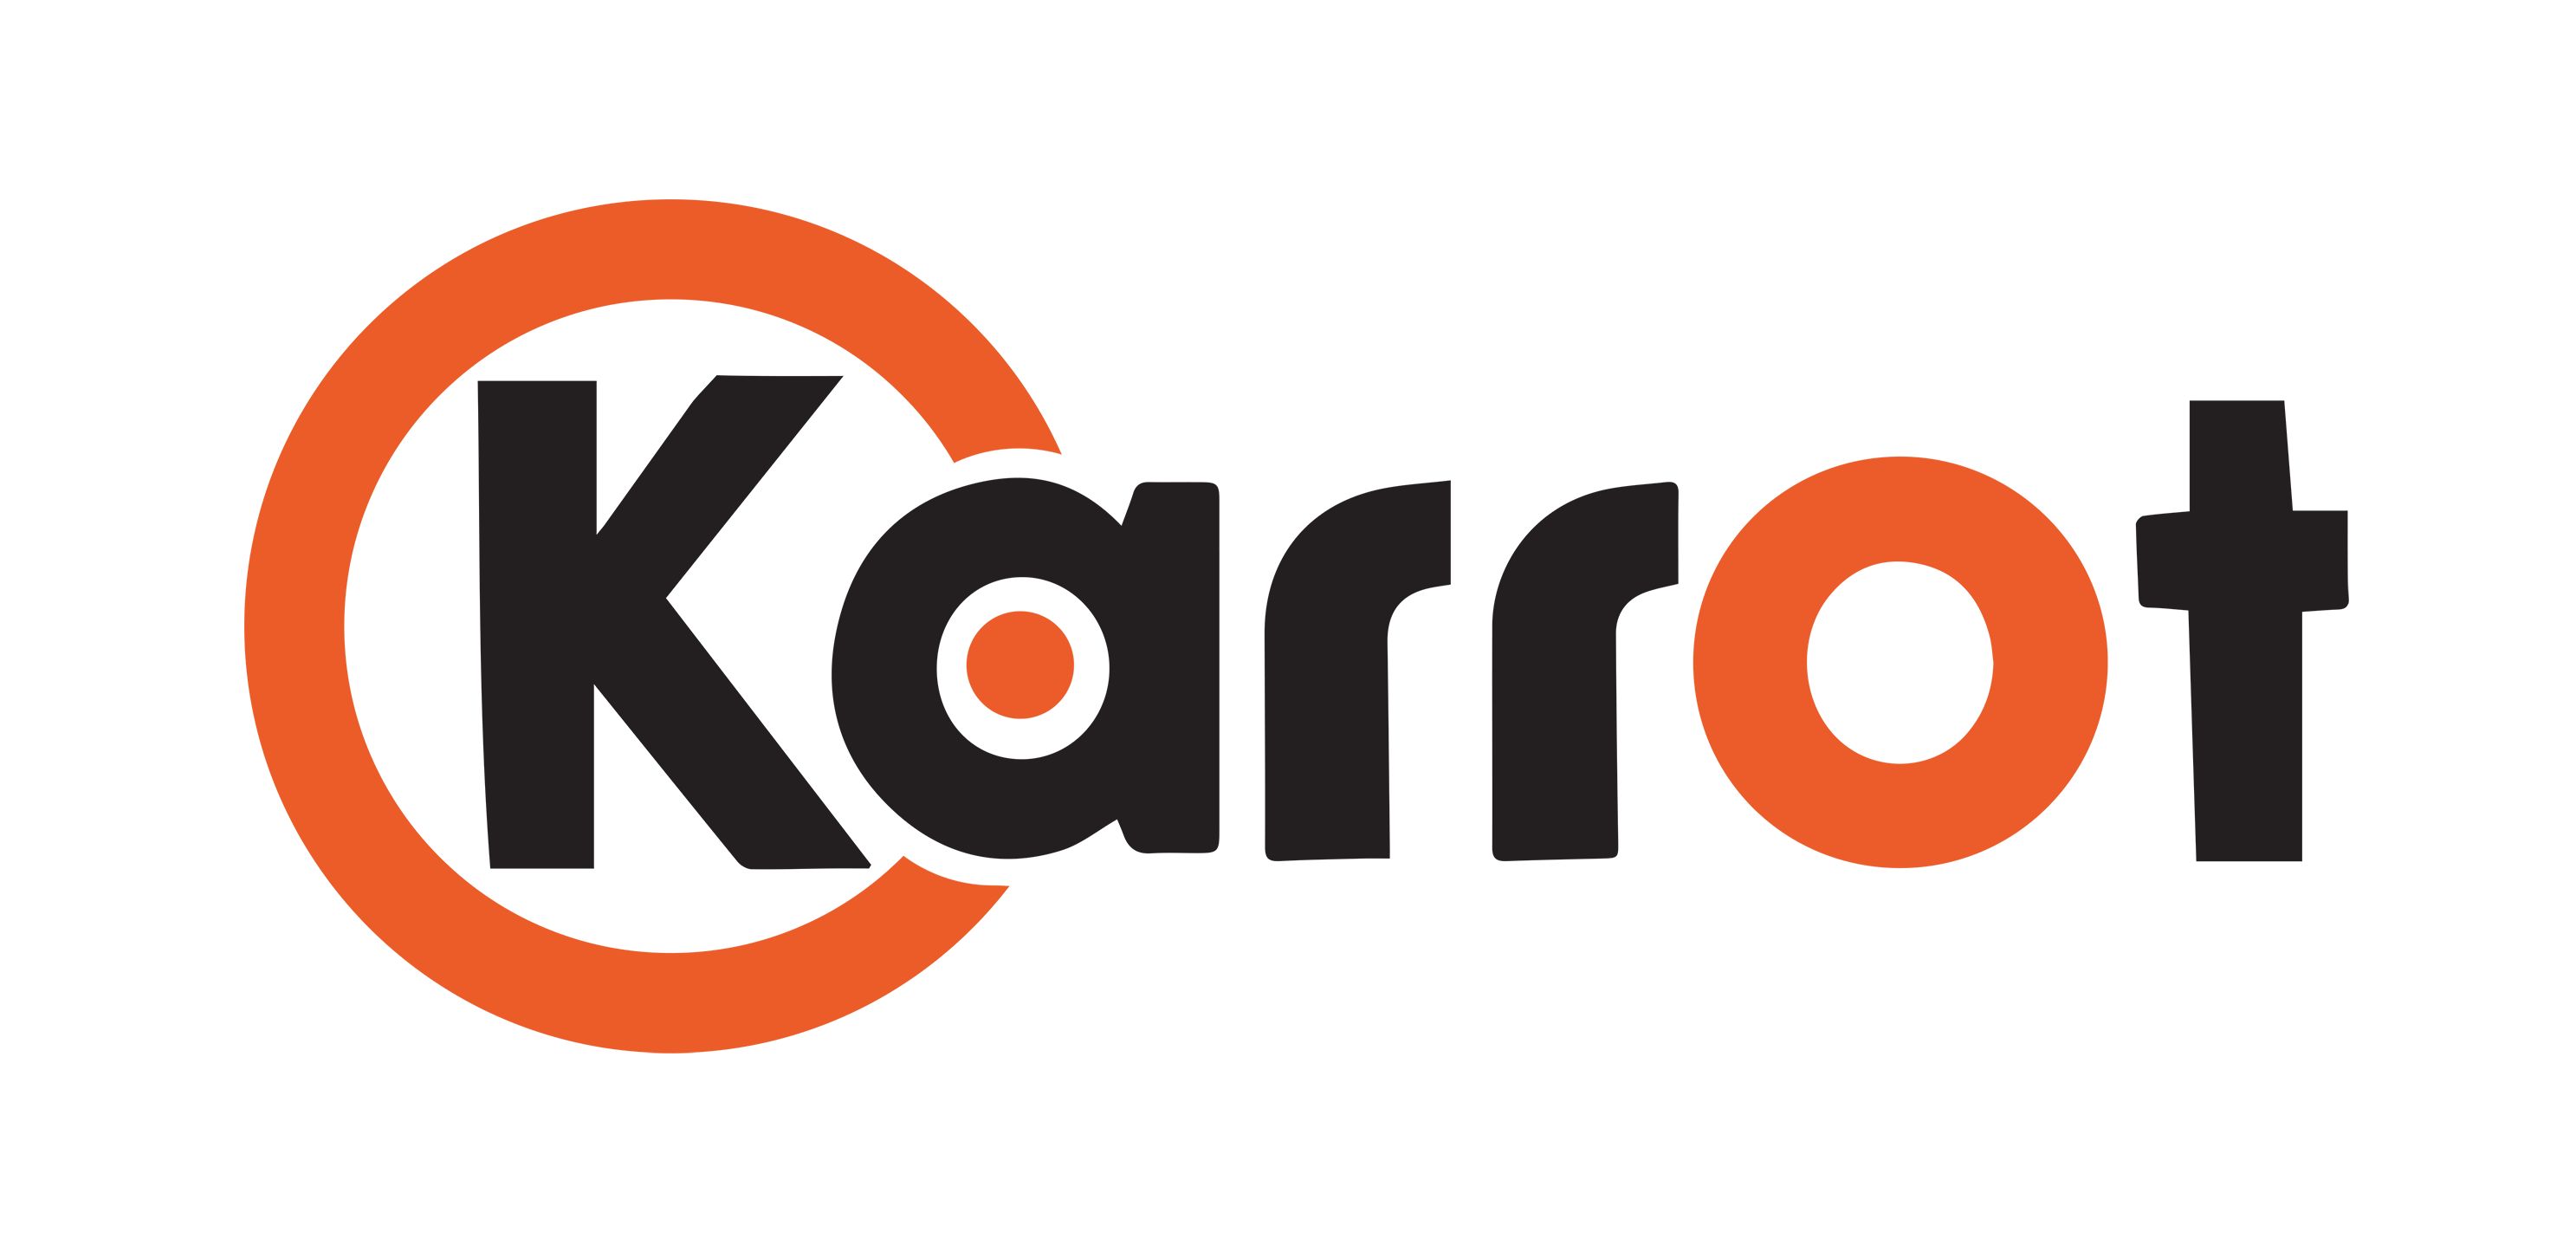 We are Karrot!